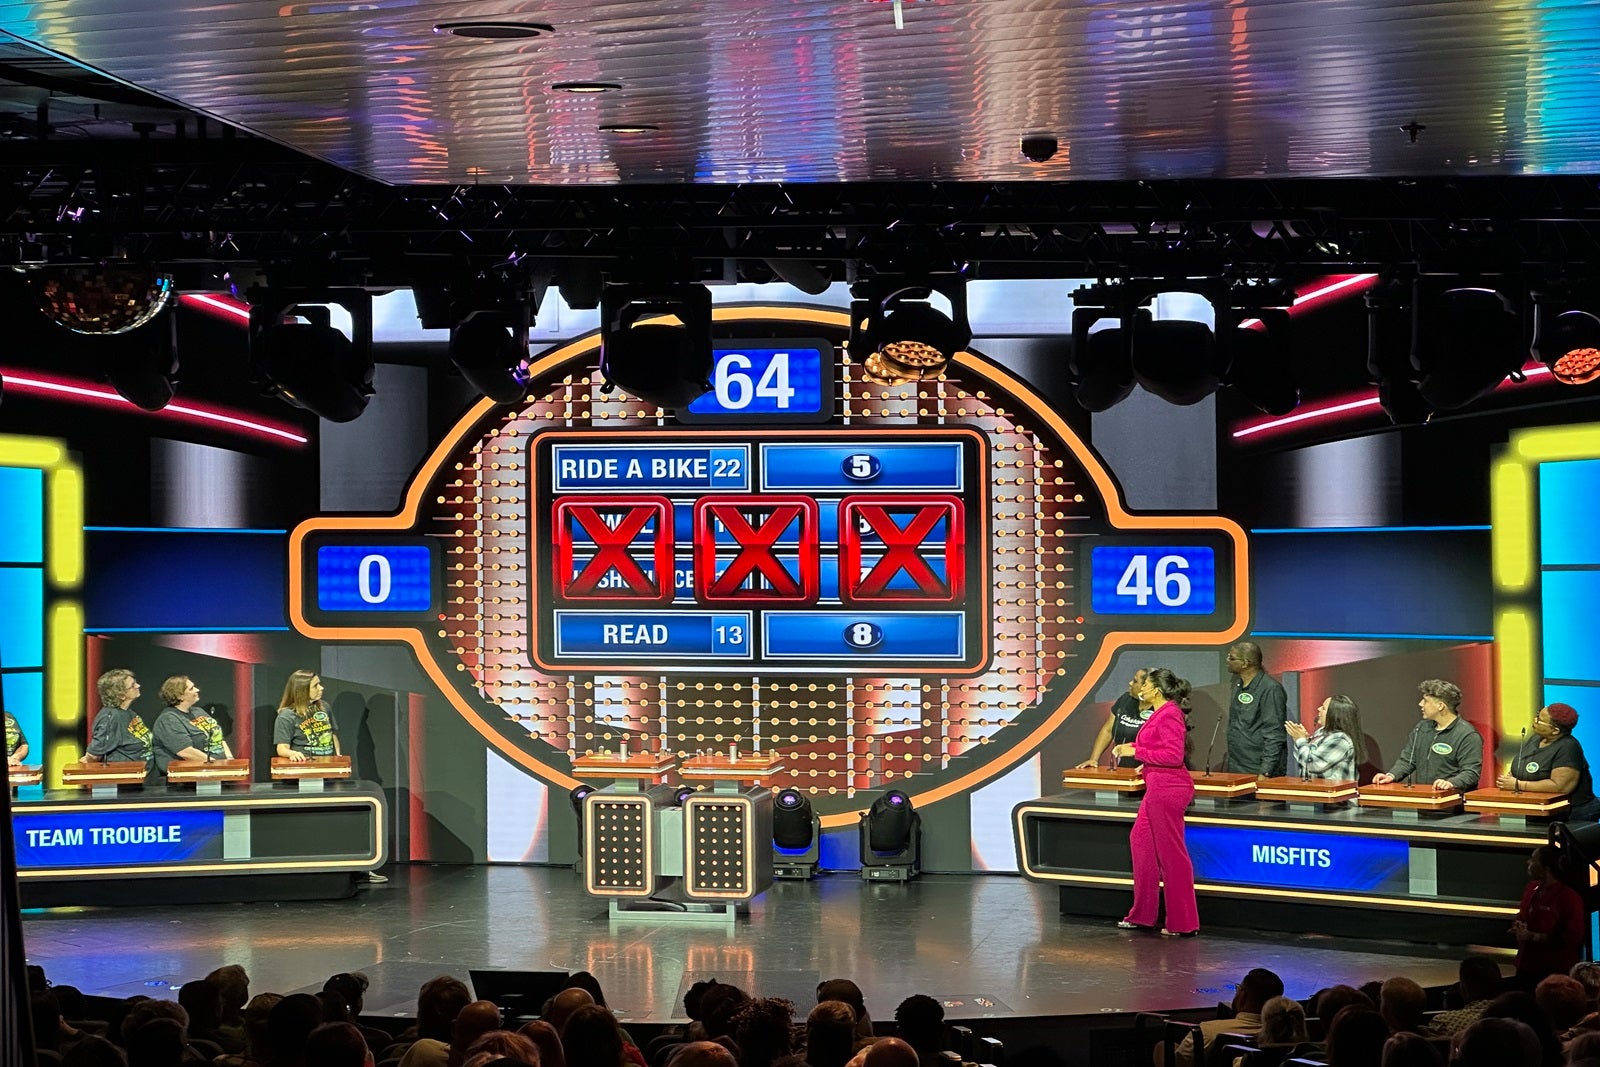 Two teams playing Family Feud on a cruise ship stage in front of a giant LED screen